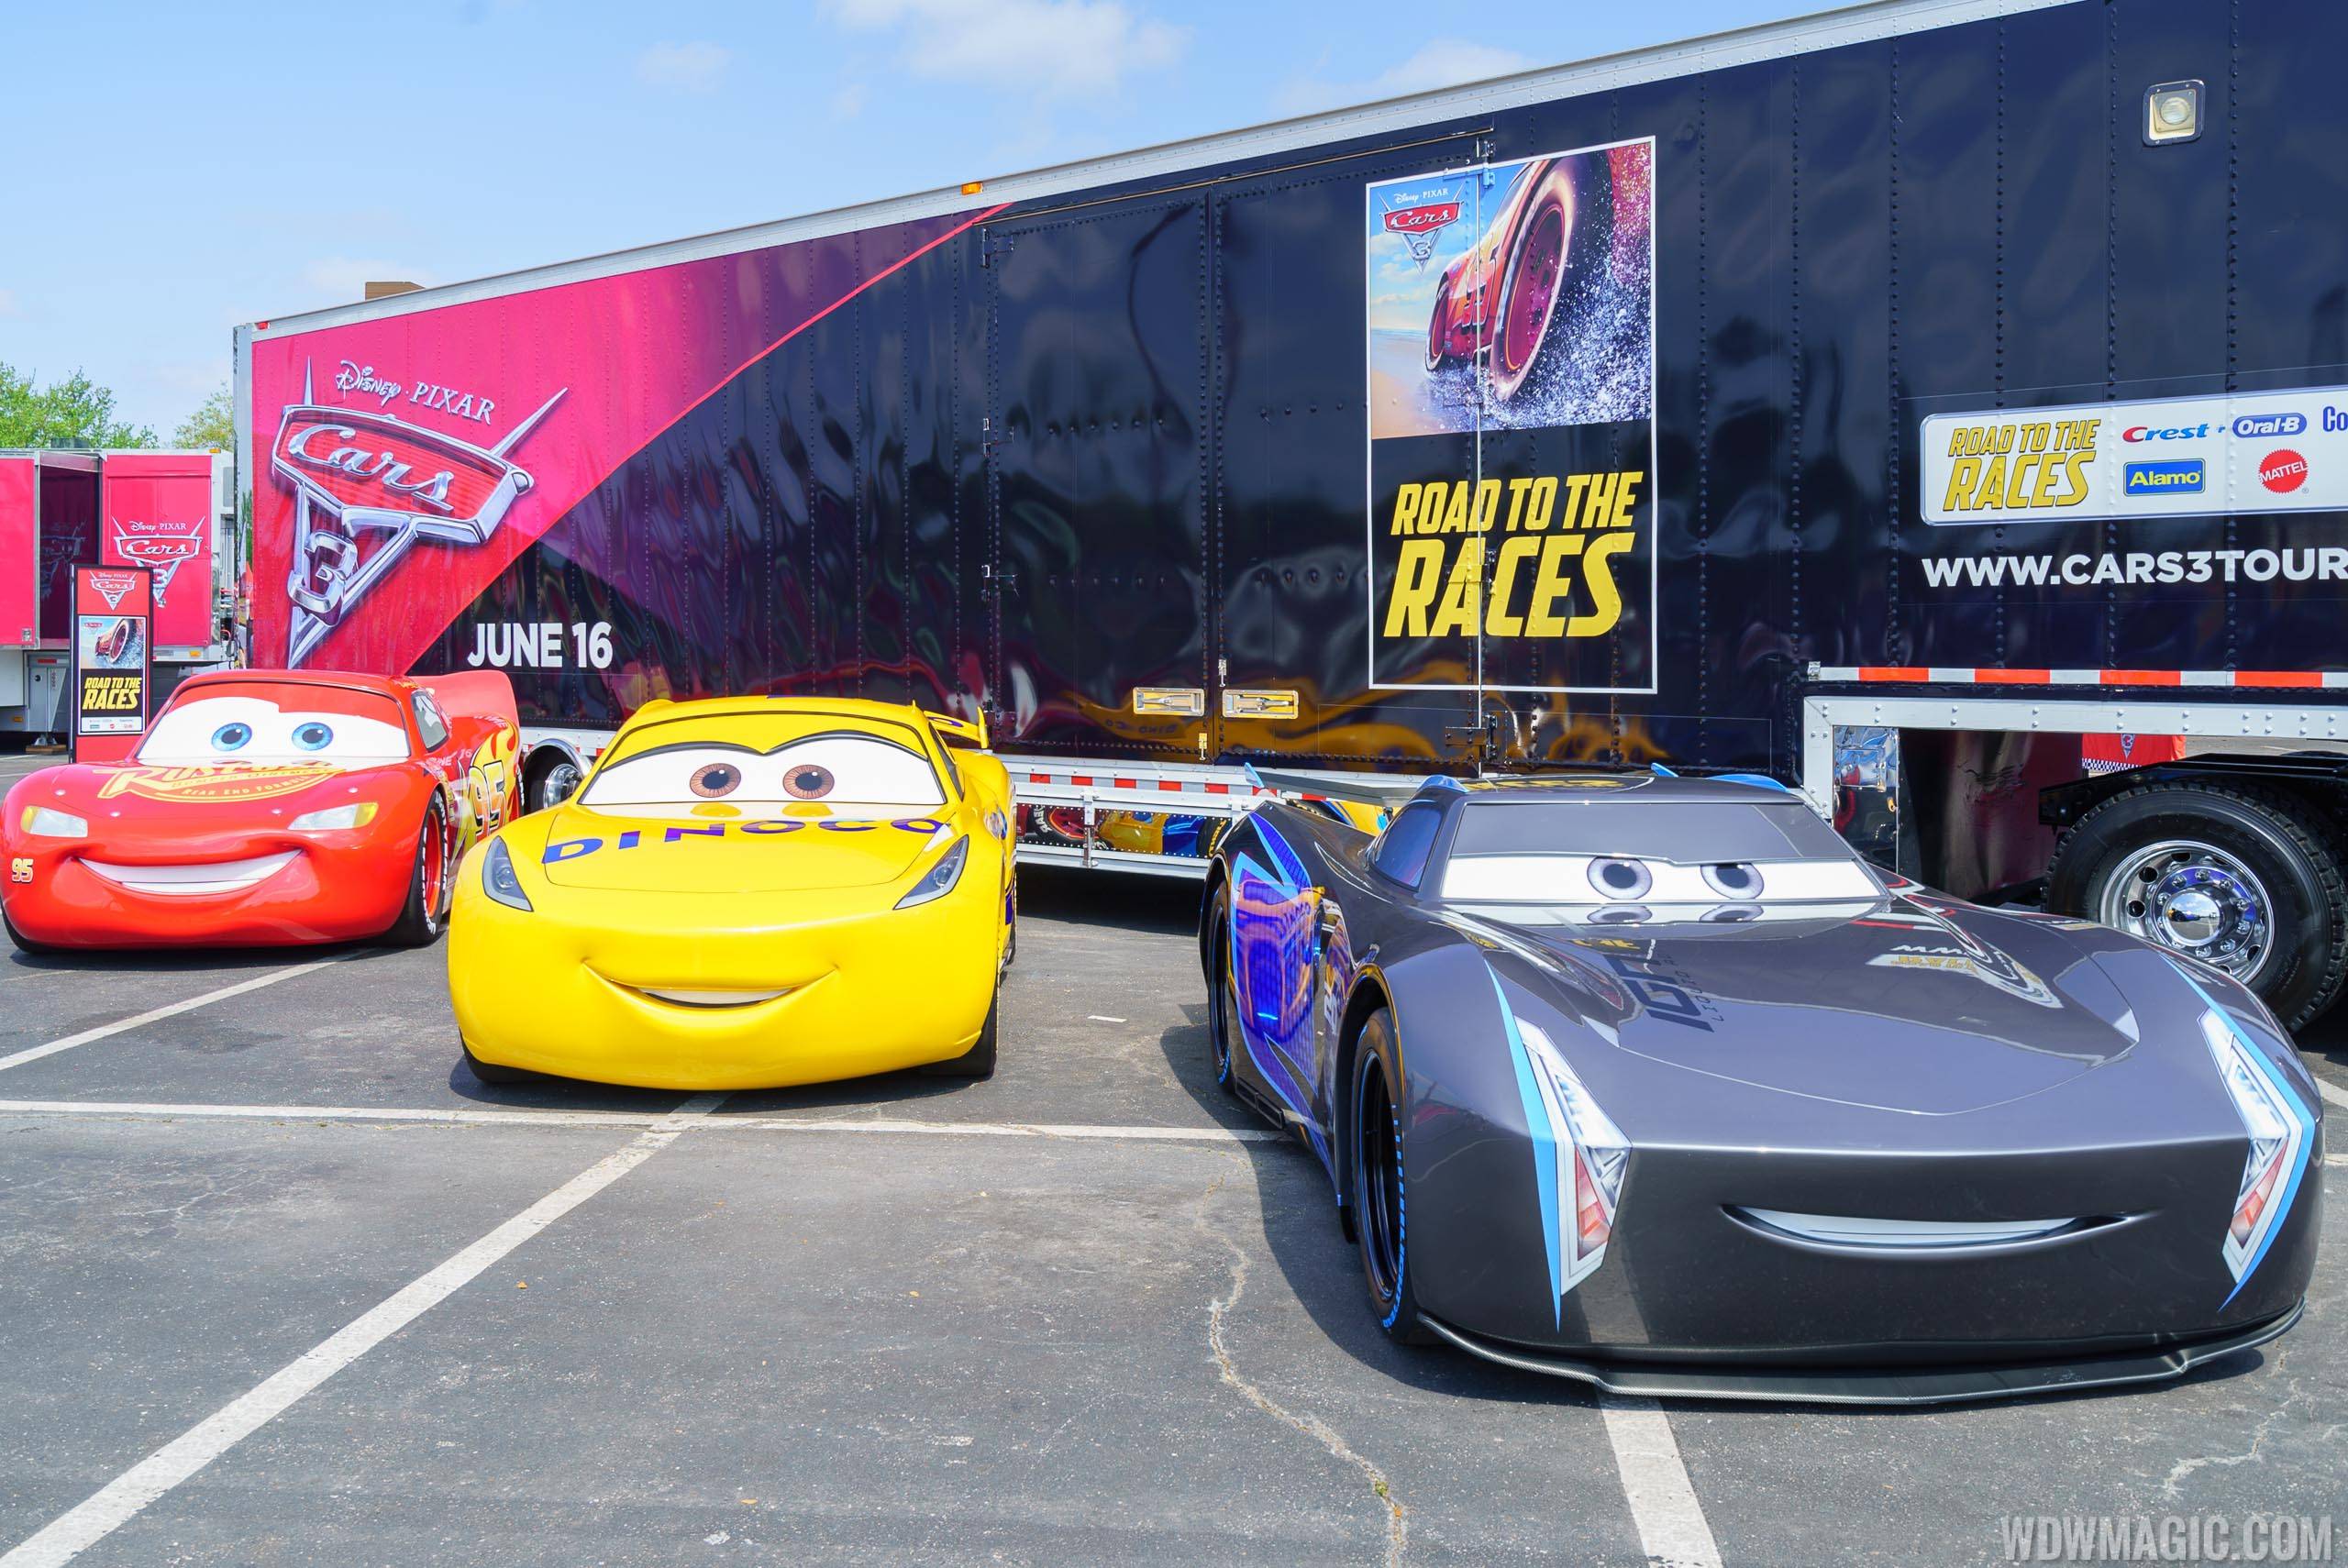 PHOTOS - Cars 3 Road to the Races now at Disney Springs